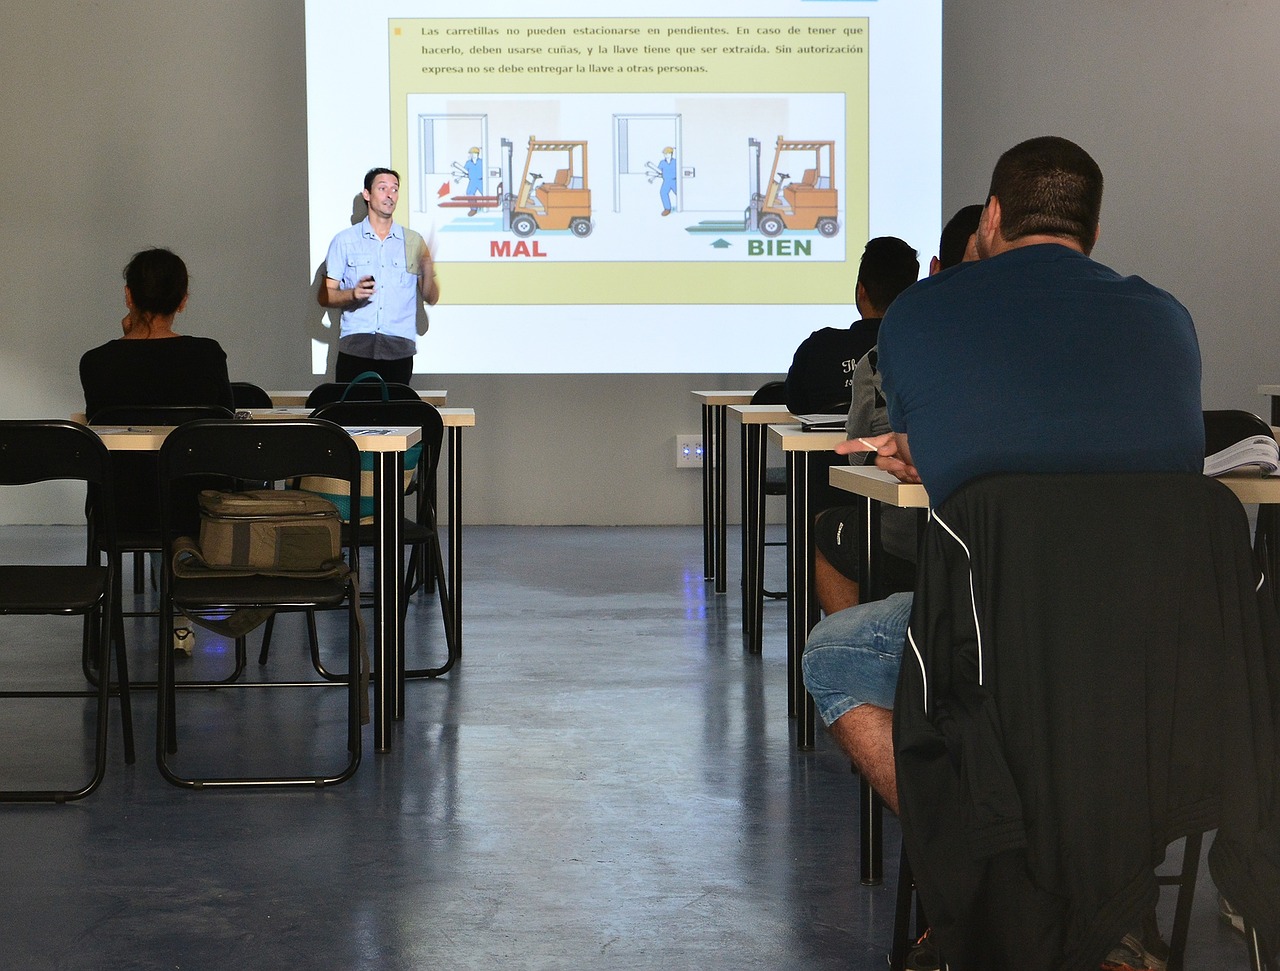 A group of employees listens to a man give a presentation